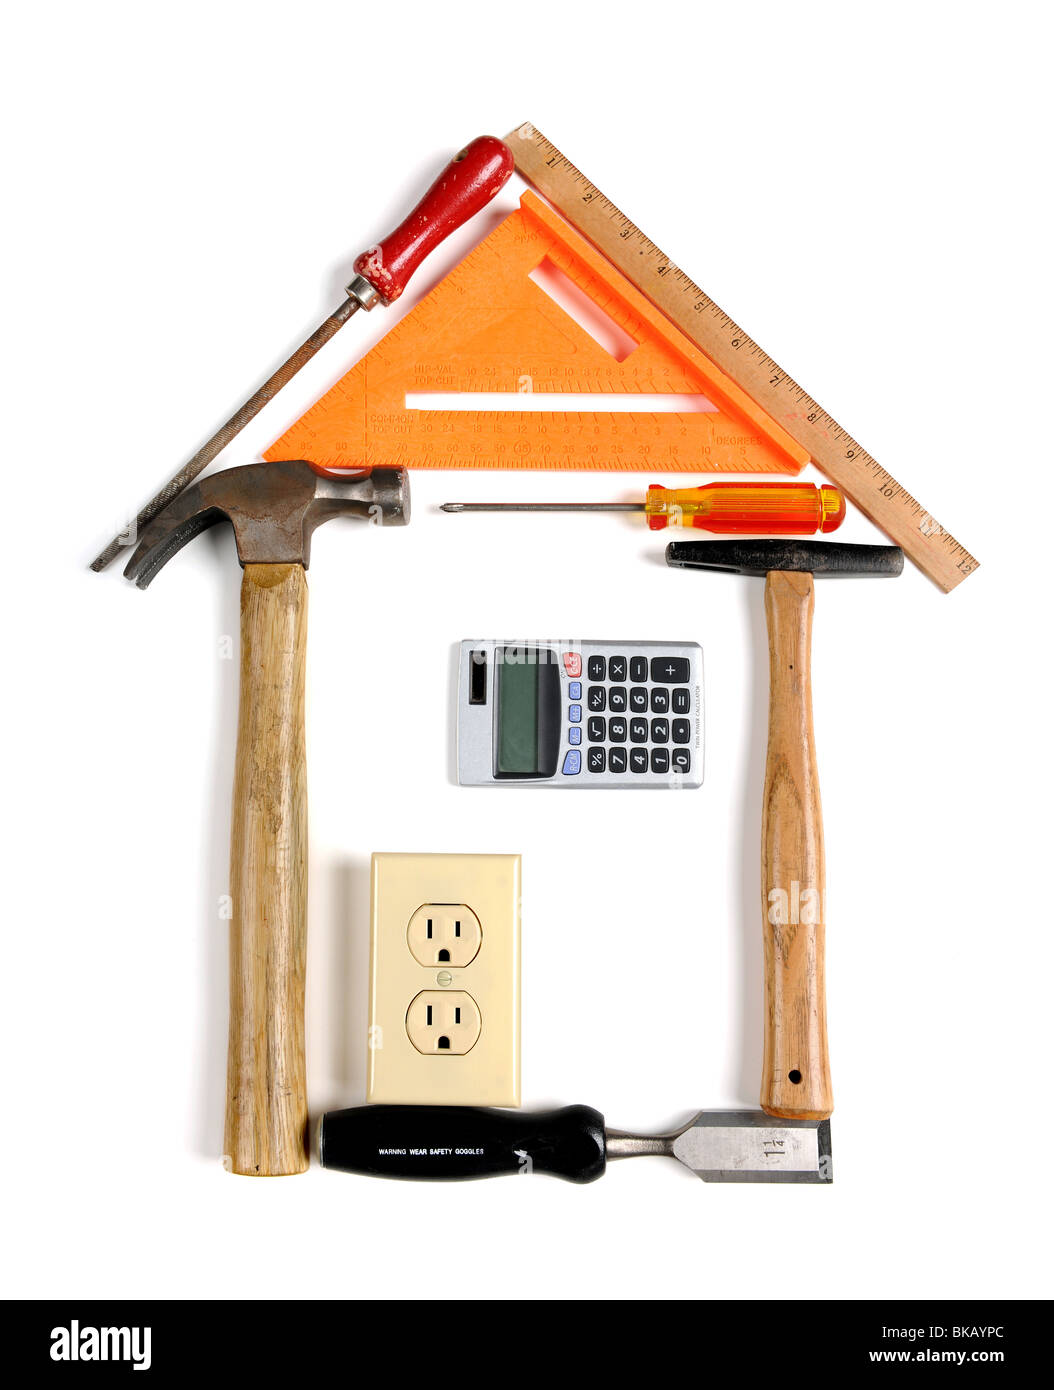 House made of tools to symbolize home improvement Stock Photo